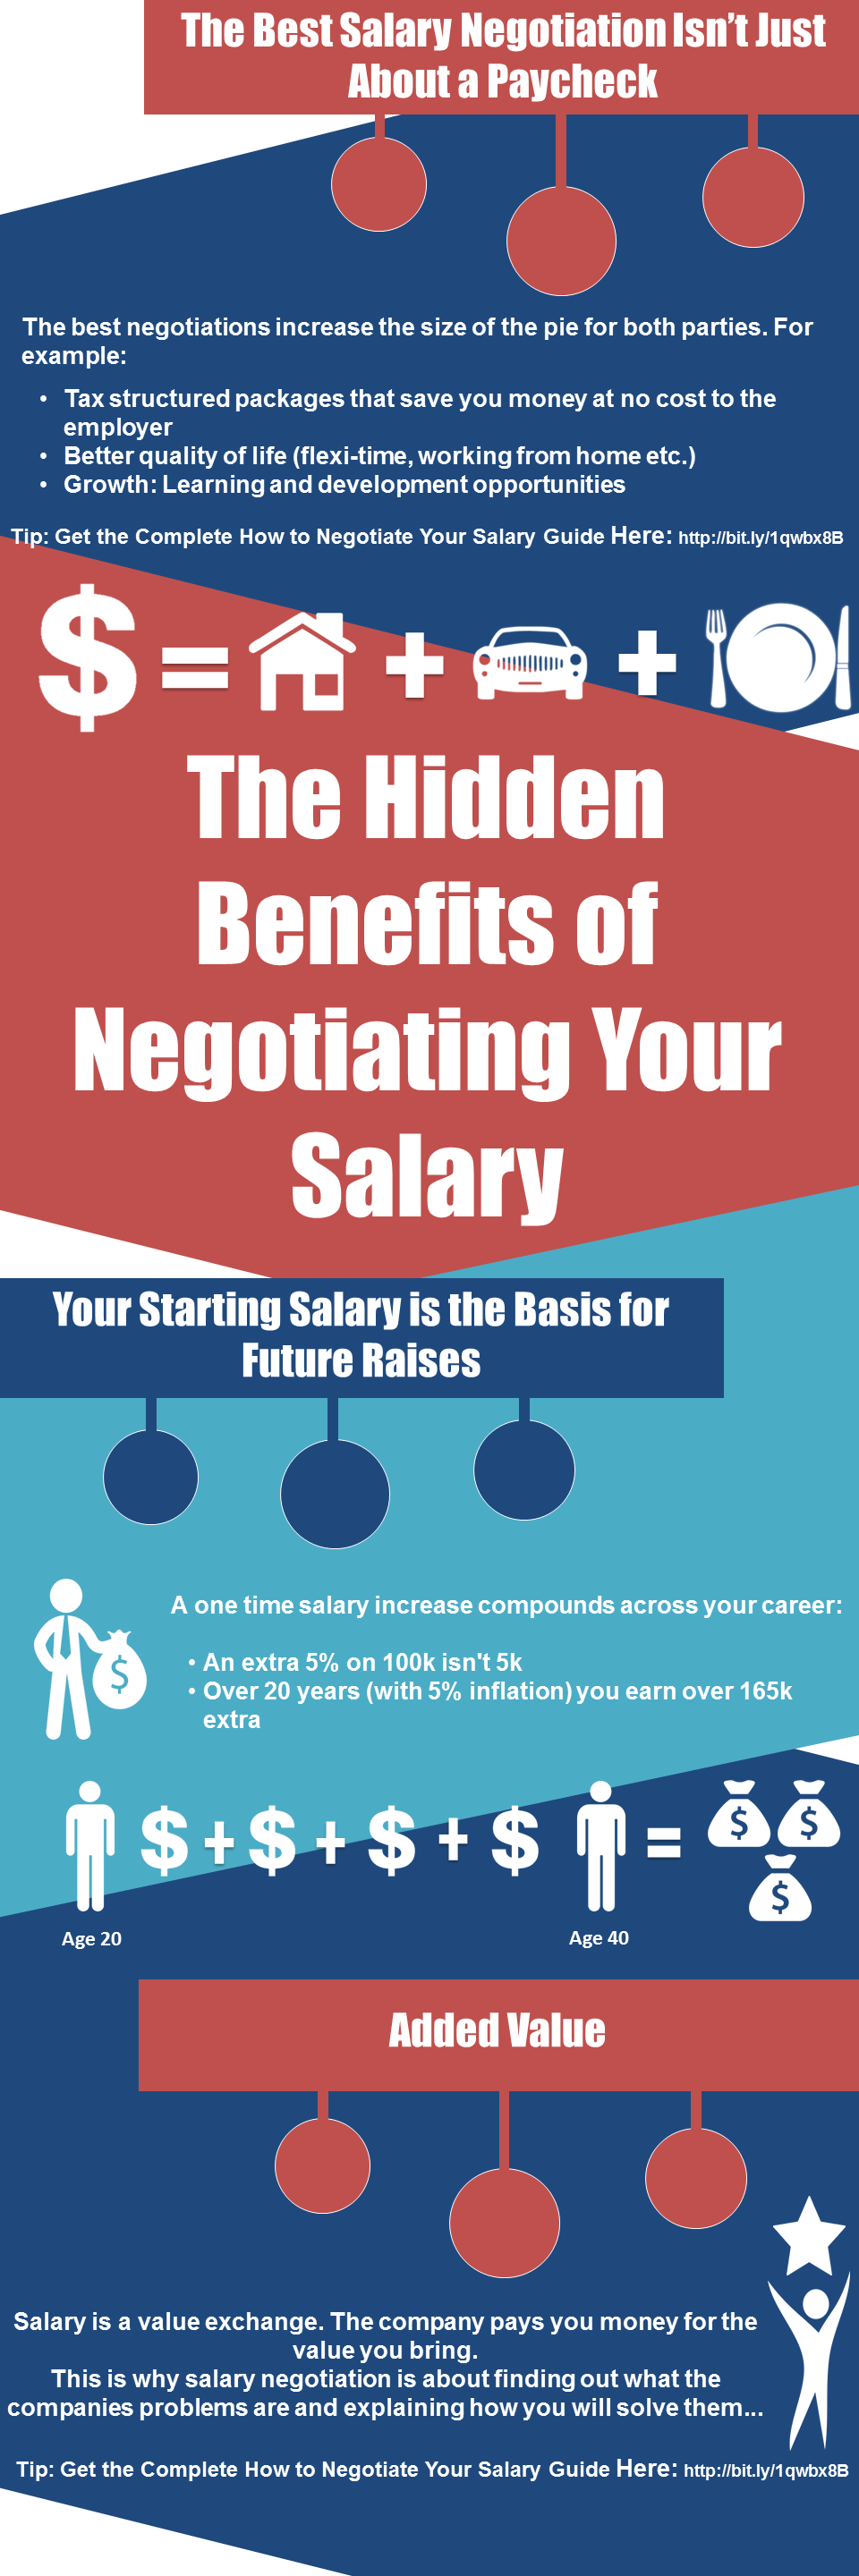 Salary Negotiation: How To Earn More Money and Respect From Your Employer